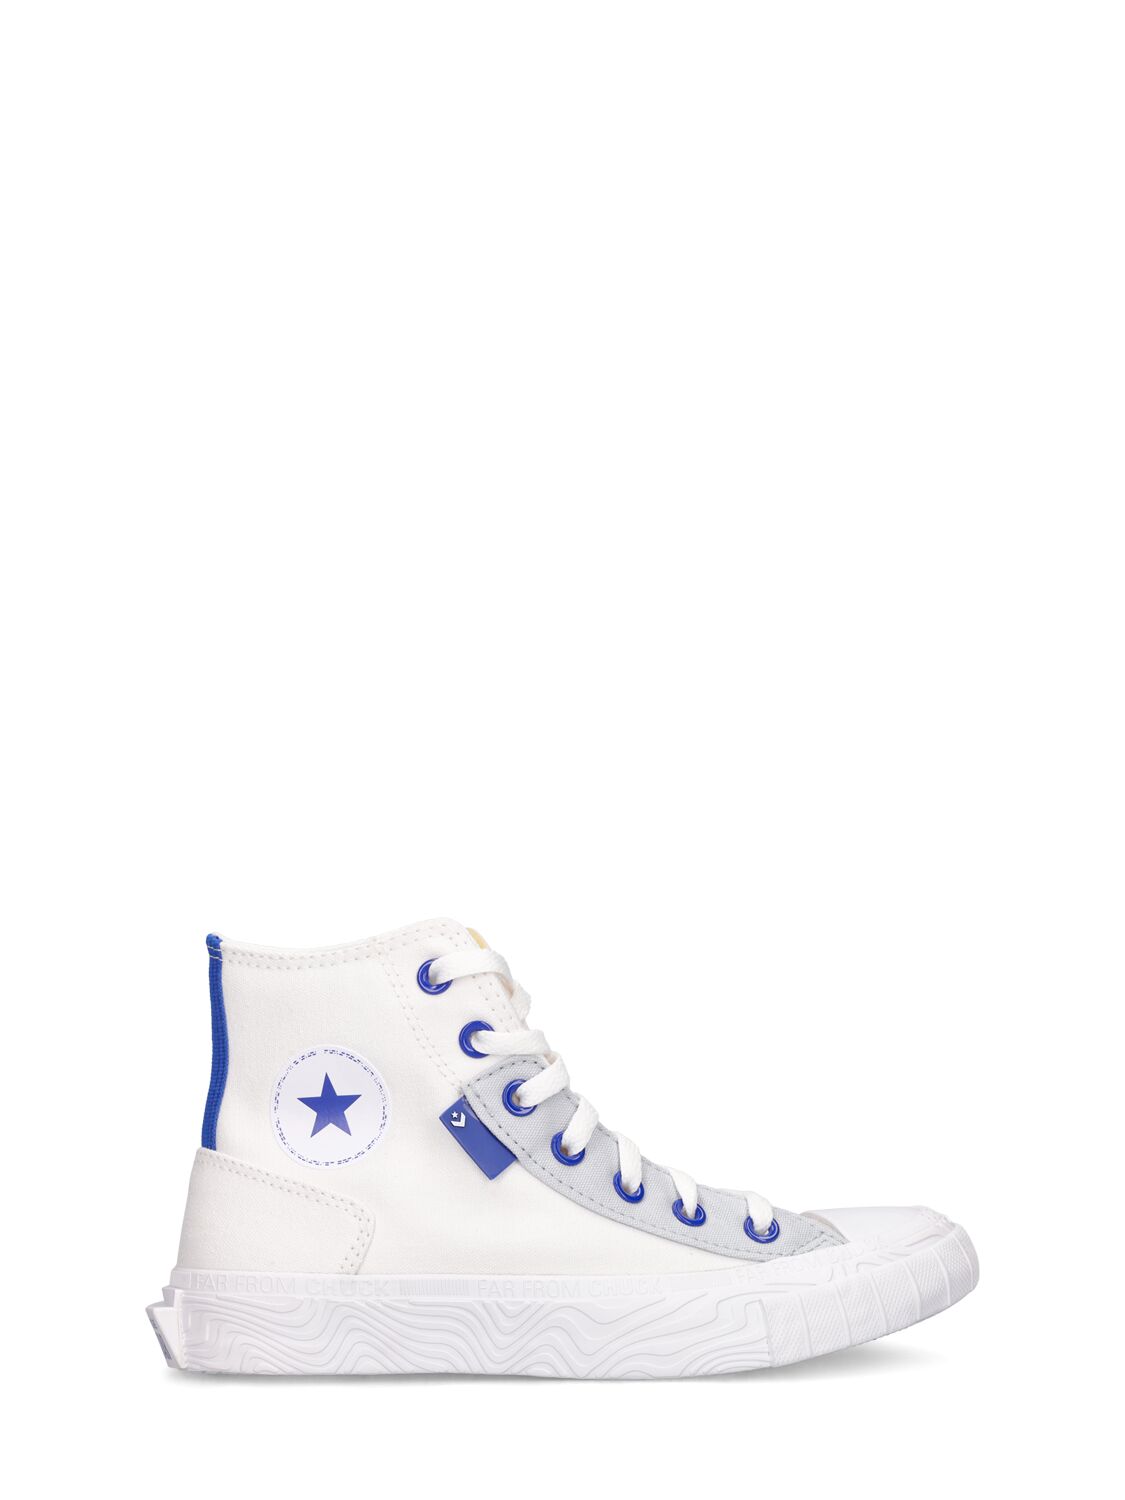 Image of Chuck Taylor Canvas High Sneakers